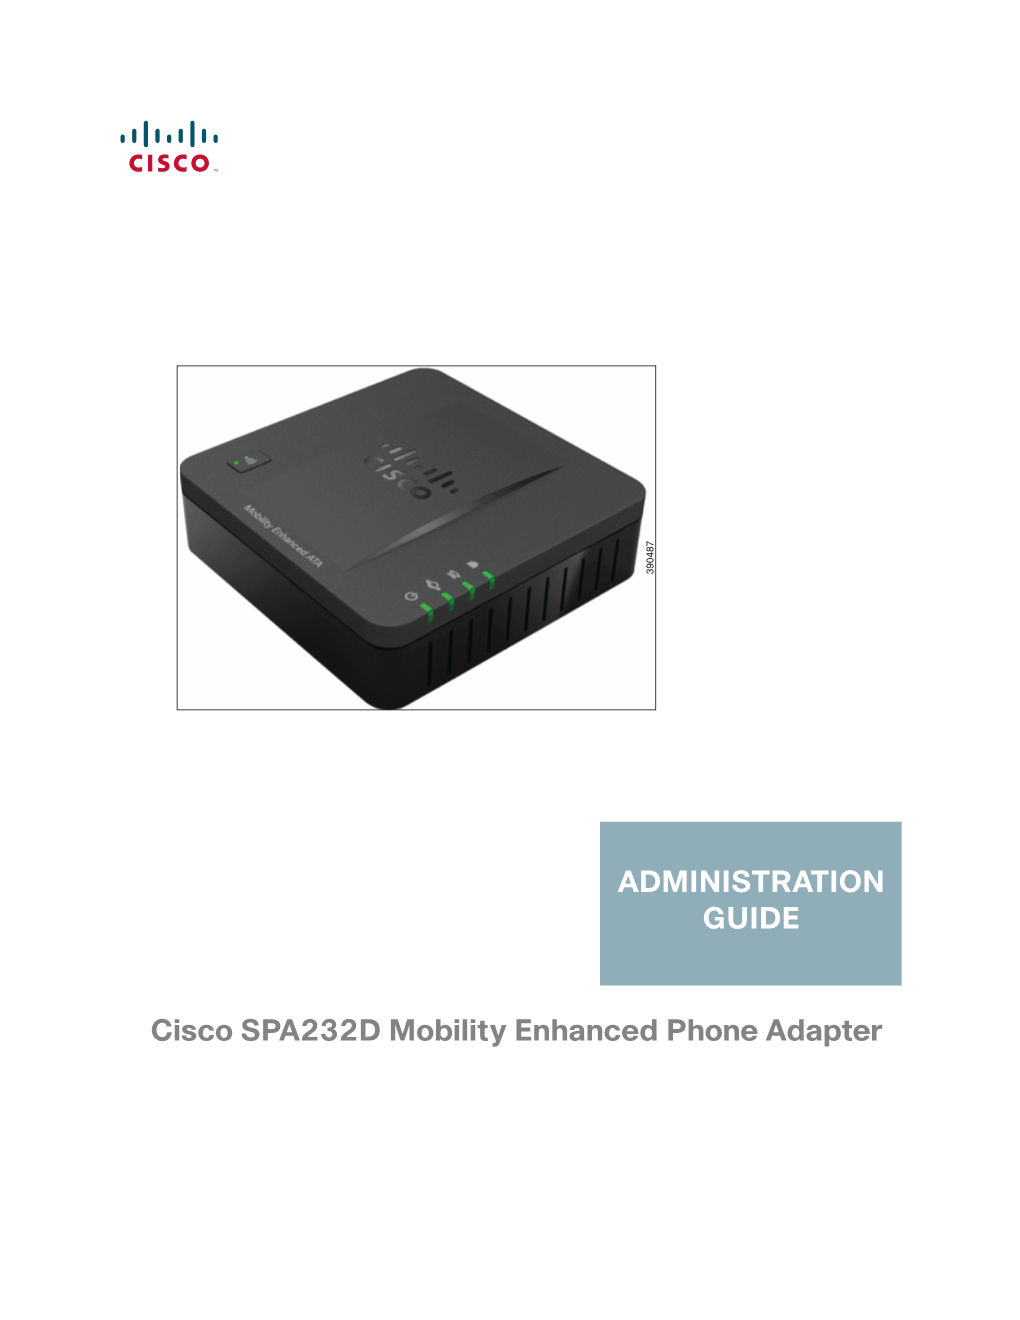 Cisco SPA232D Mobility Enhanced Phone Adapter Contents